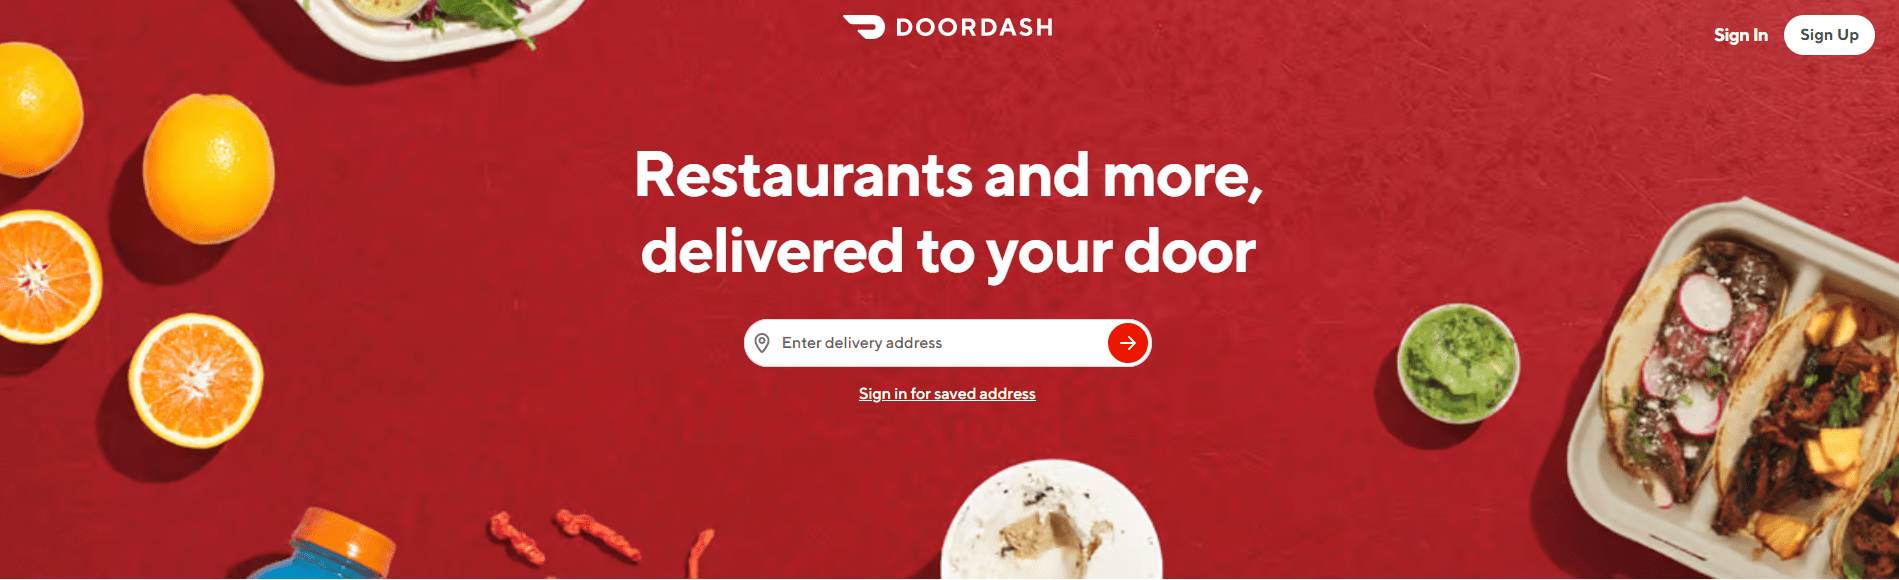 DoorDash Food Delivery & Takeout